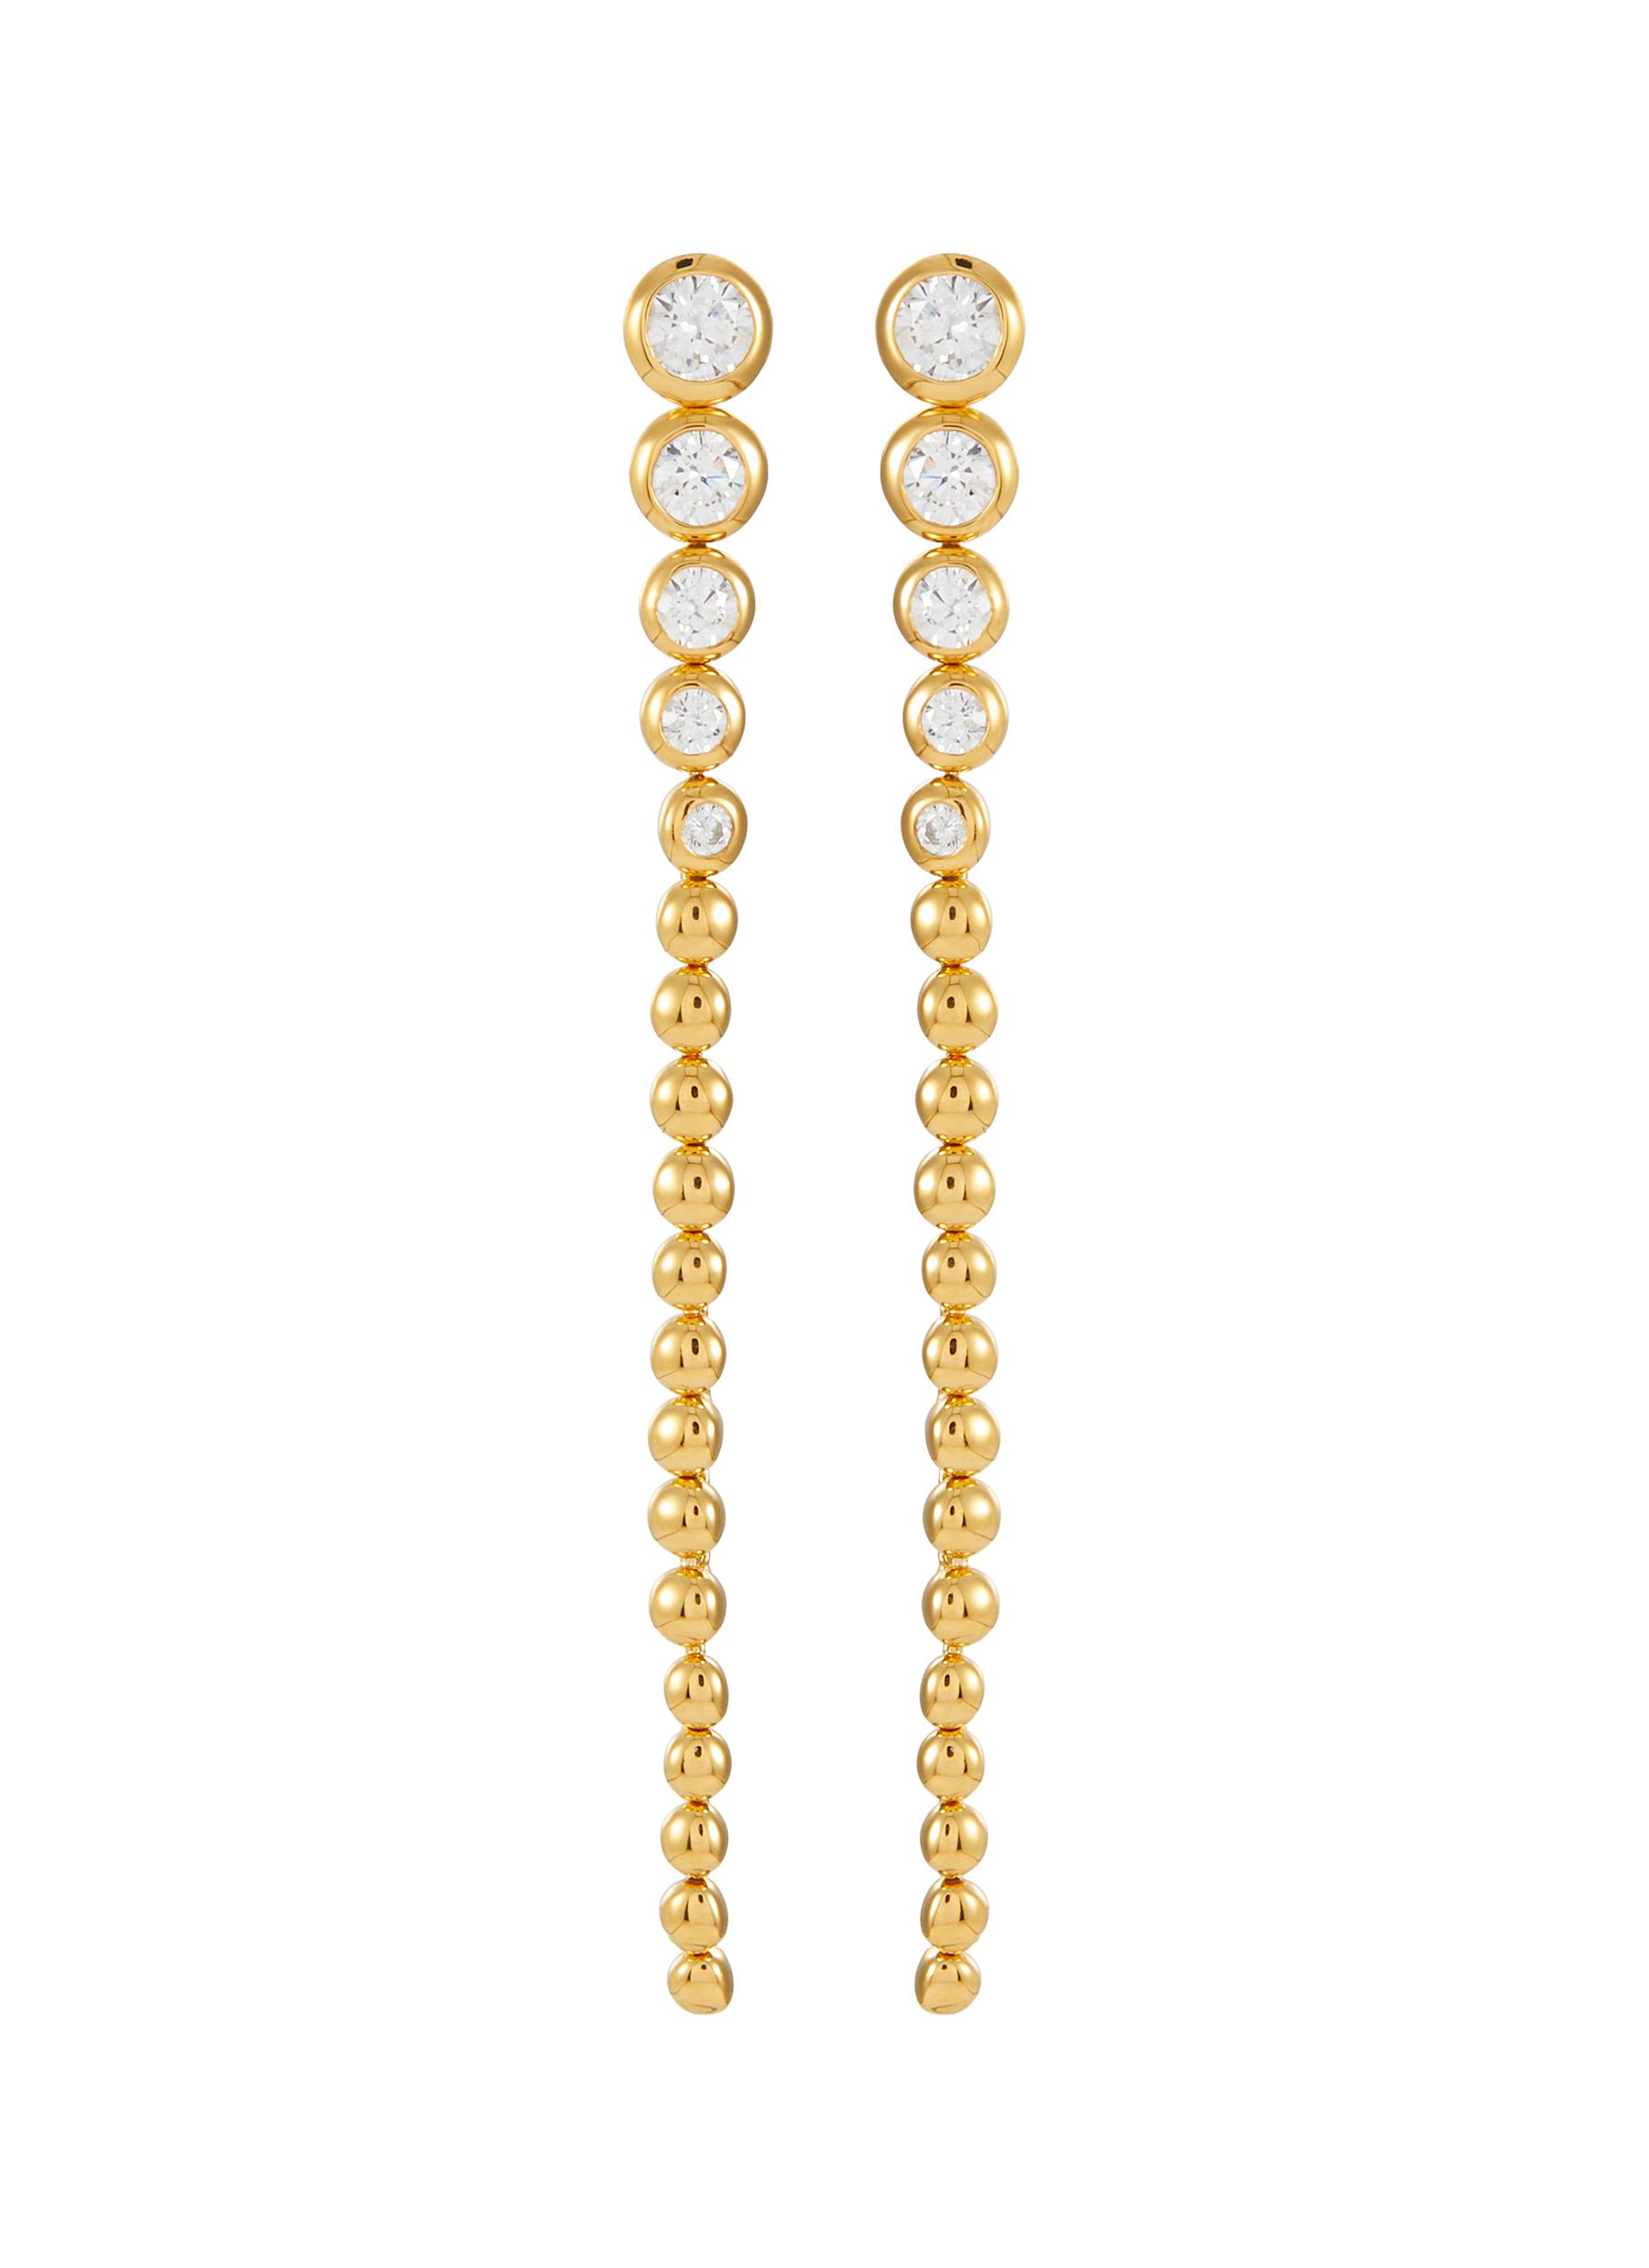 MISSOMA Articulated Beaded Stone Extra Long Drop Stud Earrings in 18ct Gold  Plated Vermeil/Cubic Zirconia | Endource